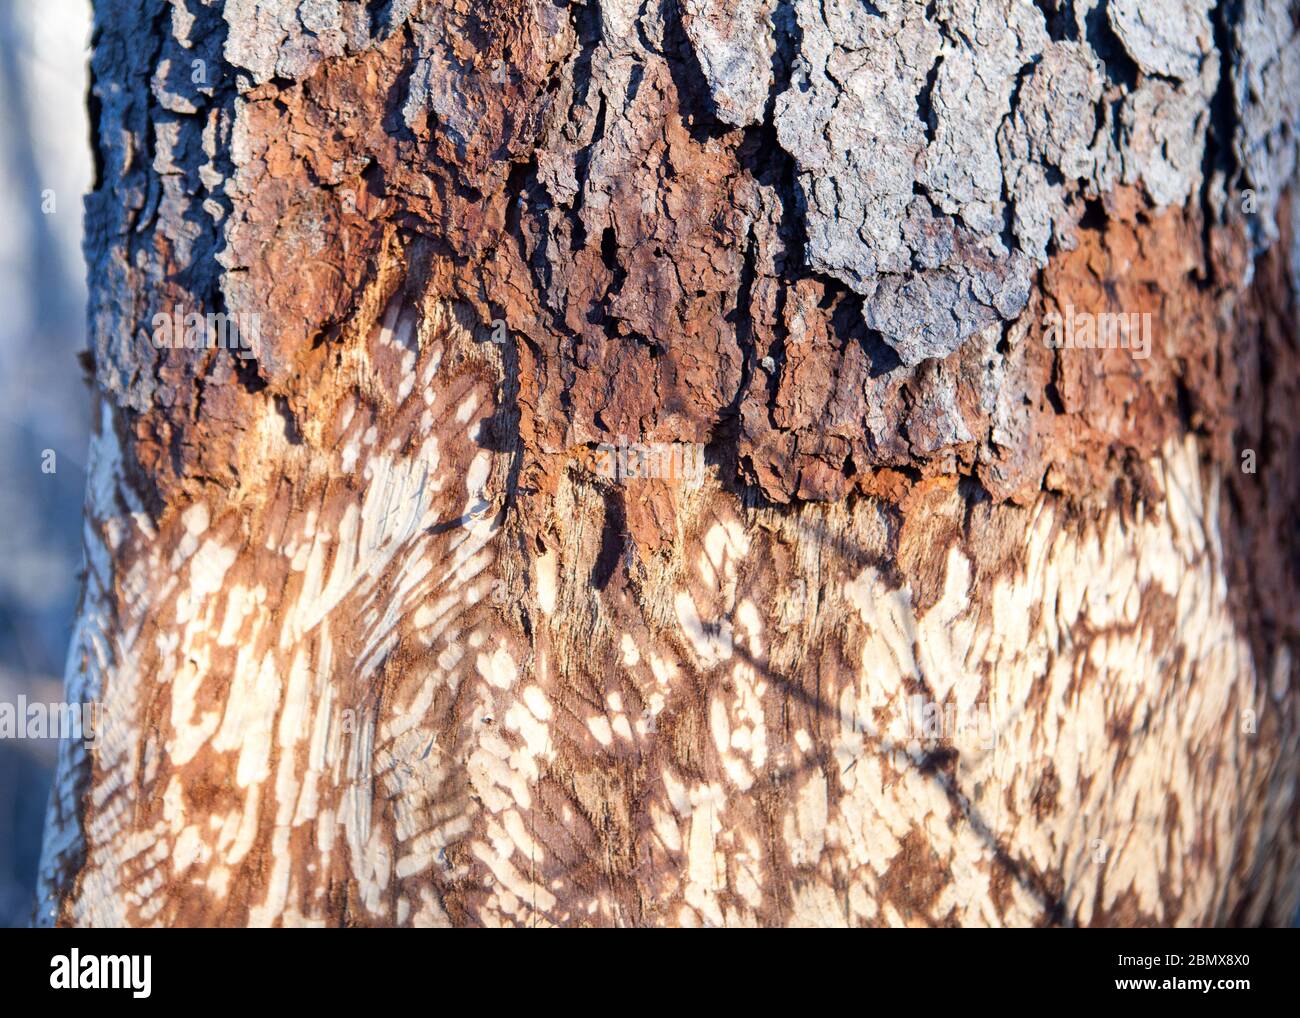 Beaver teeth marks on the bark of a tree in upstate New York, Lindsay-Parsons Biodiversity Preserve, West Danby, NY, USA Stock Photo